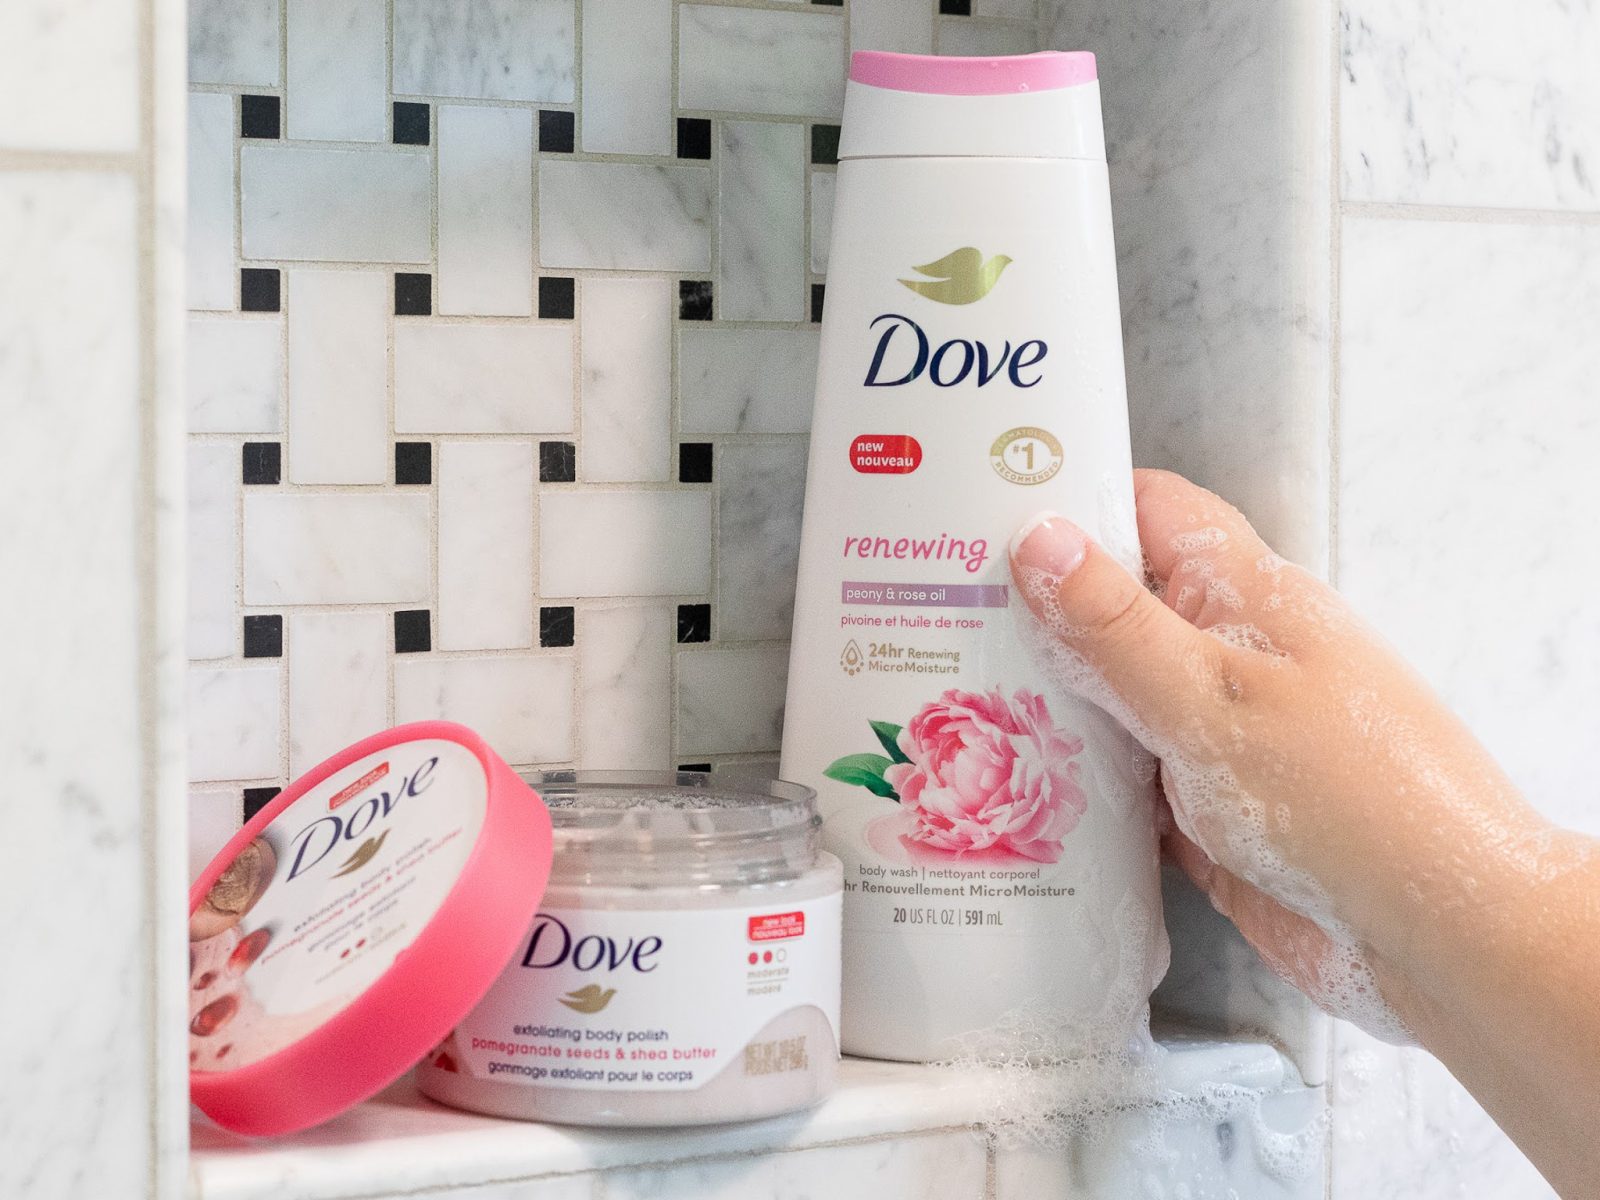 Get A Bottle Of Dove Body Wash & Dove Men+Care Body Wash As Low As $4 Each At Kroger